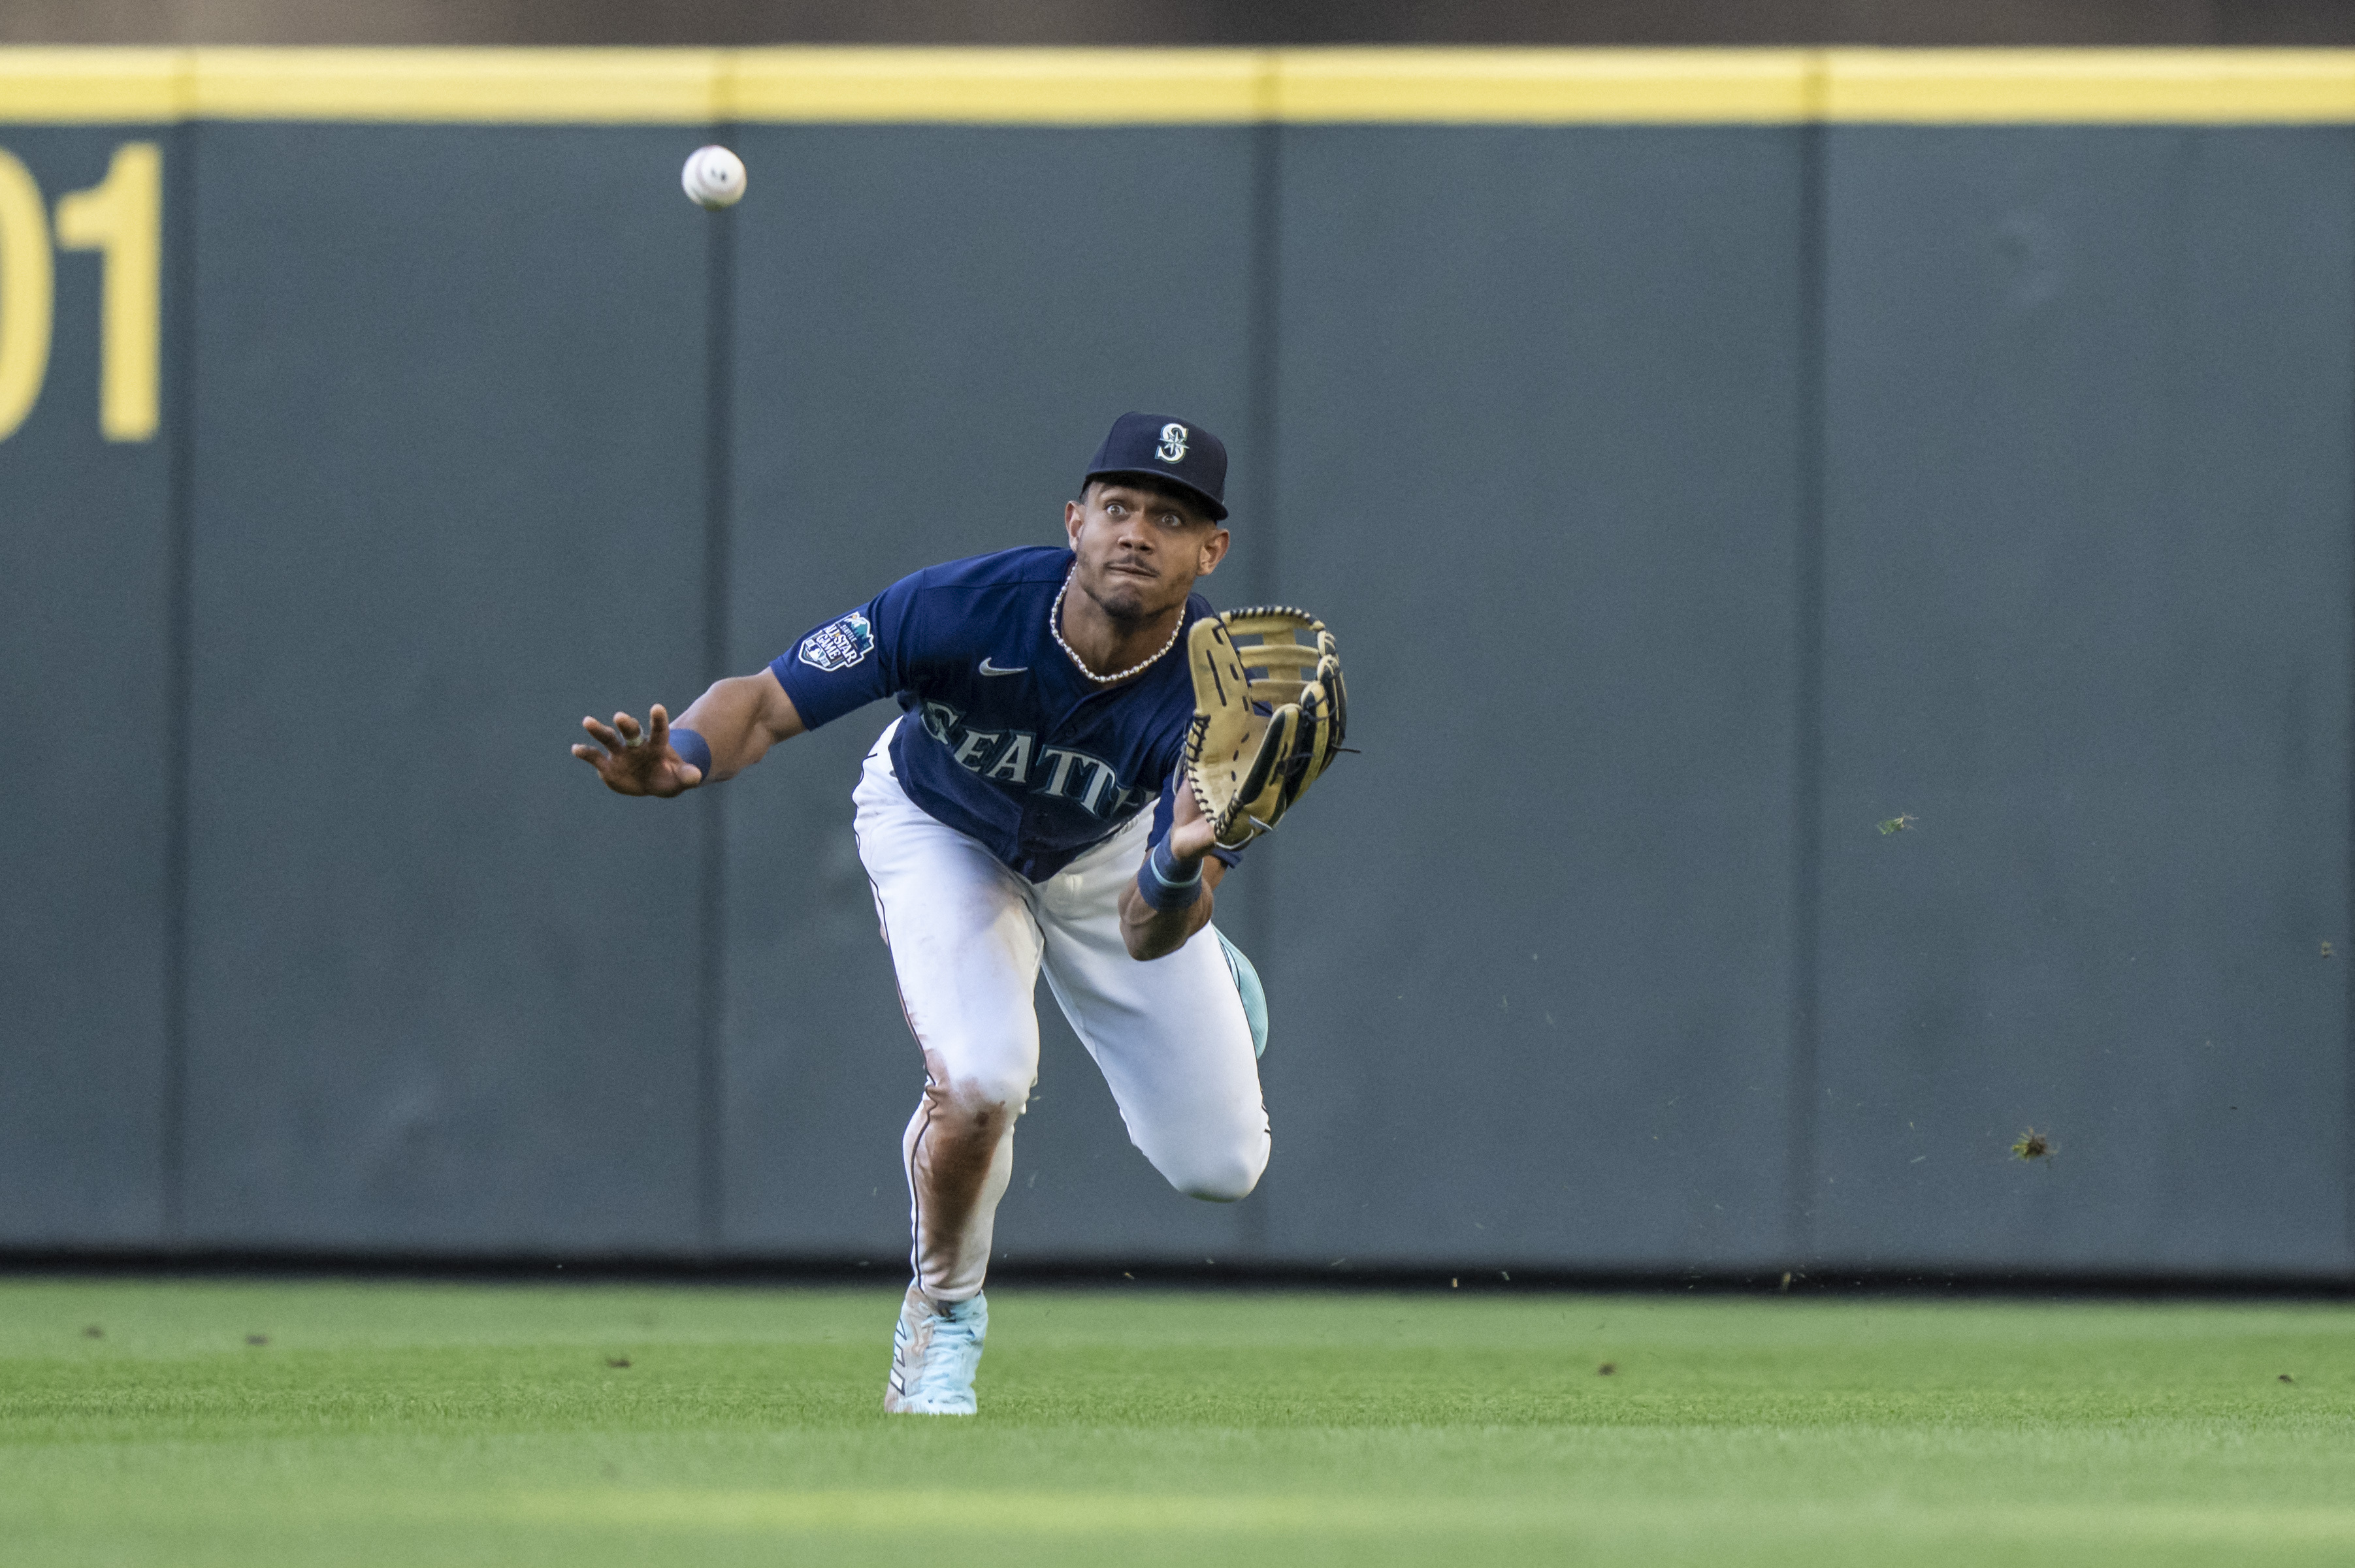 Logan Gilbert shuts down Padres, gets help from Julio Rodríguez catch in  center as Mariners win 2-0 - The San Diego Union-Tribune